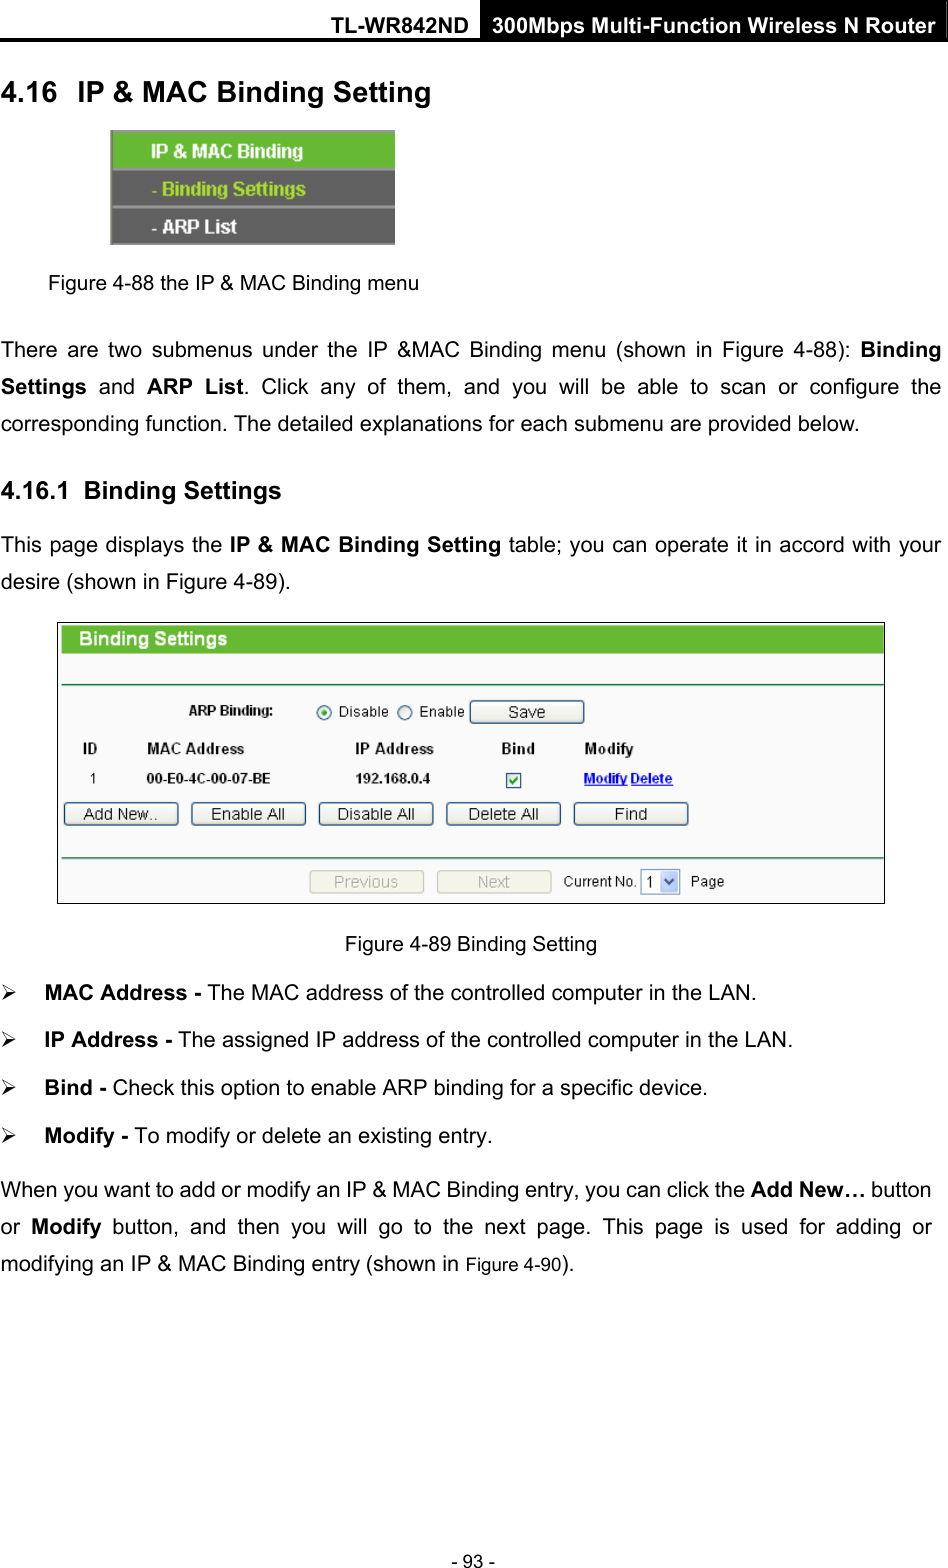 TL-WR842ND 300Mbps Multi-Function Wireless N Router - 93 - 4.16  IP &amp; MAC Binding Setting  Figure 4-88 the IP &amp; MAC Binding menu There are two submenus under the IP &amp;MAC Binding menu (shown in Figure 4-88):  Binding Settings  and ARP List. Click any of them, and you will be able to scan or configure the corresponding function. The detailed explanations for each submenu are provided below. 4.16.1  Binding Settings This page displays the IP &amp; MAC Binding Setting table; you can operate it in accord with your desire (shown in Figure 4-89).   Figure 4-89 Binding Setting ¾ MAC Address - The MAC address of the controlled computer in the LAN.   ¾ IP Address - The assigned IP address of the controlled computer in the LAN.   ¾ Bind - Check this option to enable ARP binding for a specific device.   ¾ Modify - To modify or delete an existing entry.   When you want to add or modify an IP &amp; MAC Binding entry, you can click the Add New… button or  Modify button, and then you will go to the next page. This page is used for adding or modifying an IP &amp; MAC Binding entry (shown in Figure 4-90).   